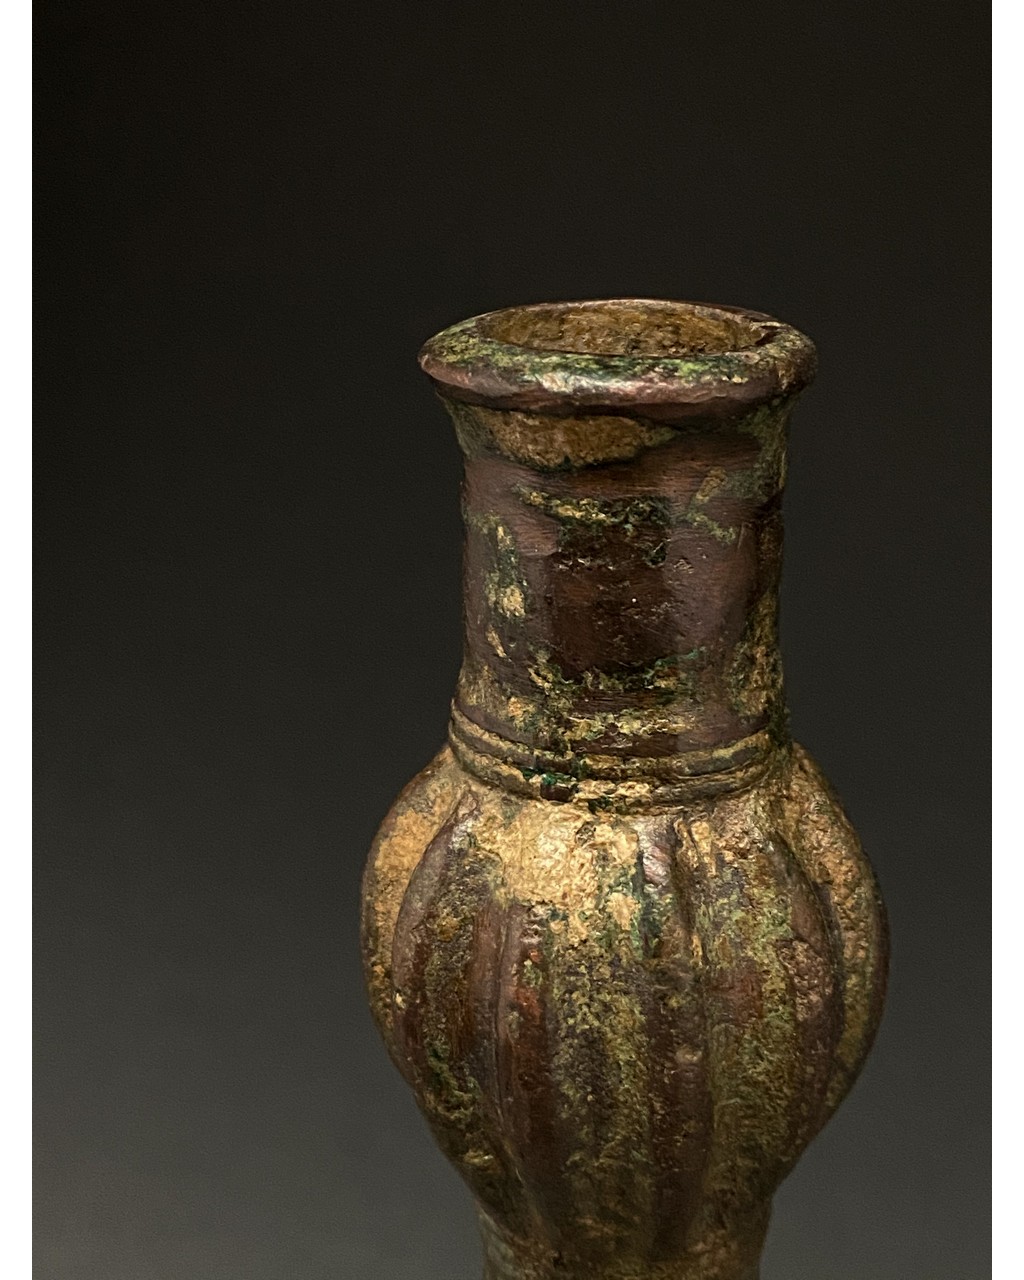 BRONZE AGE DECORATED MACE HEAD ON STAND - Image 4 of 6